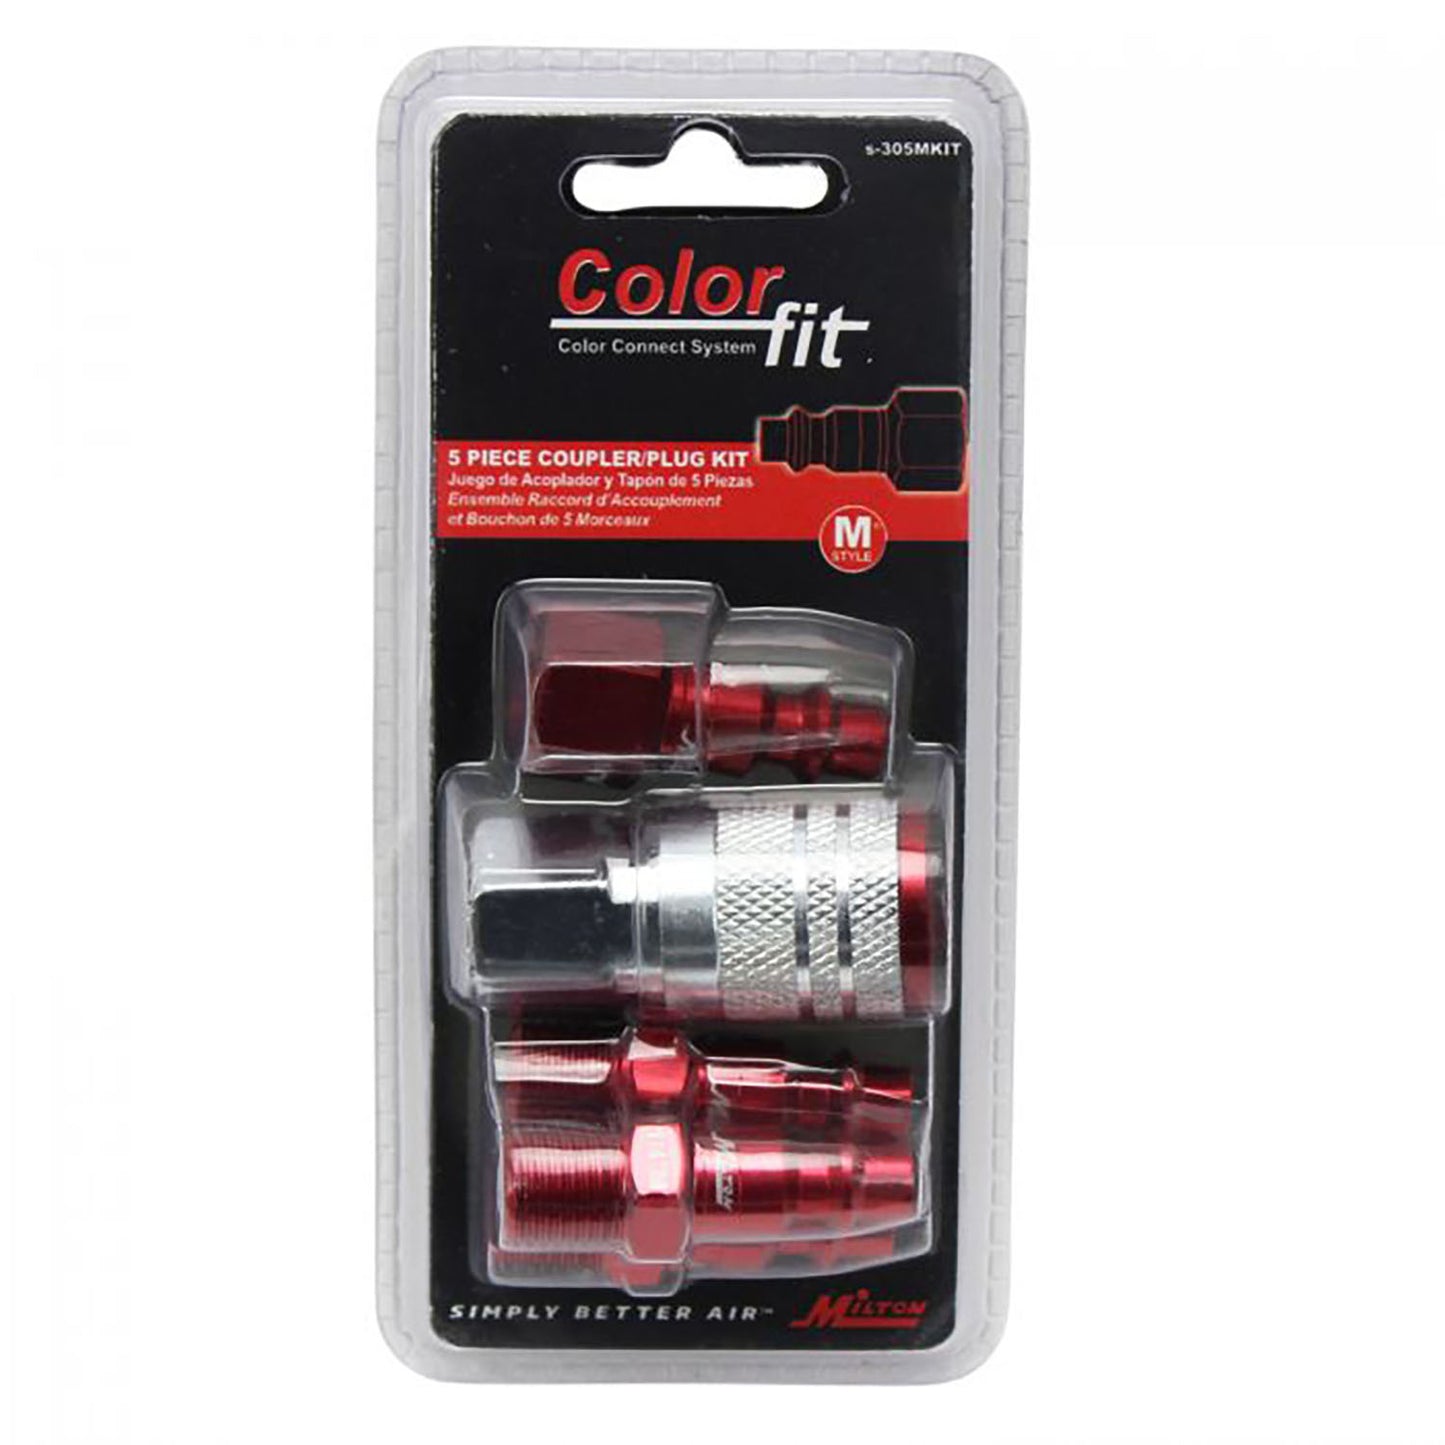 Milton ColorFit M Style coupler and Plug Kit 1/4" NPT 5 Pieces S-305MKIT Red